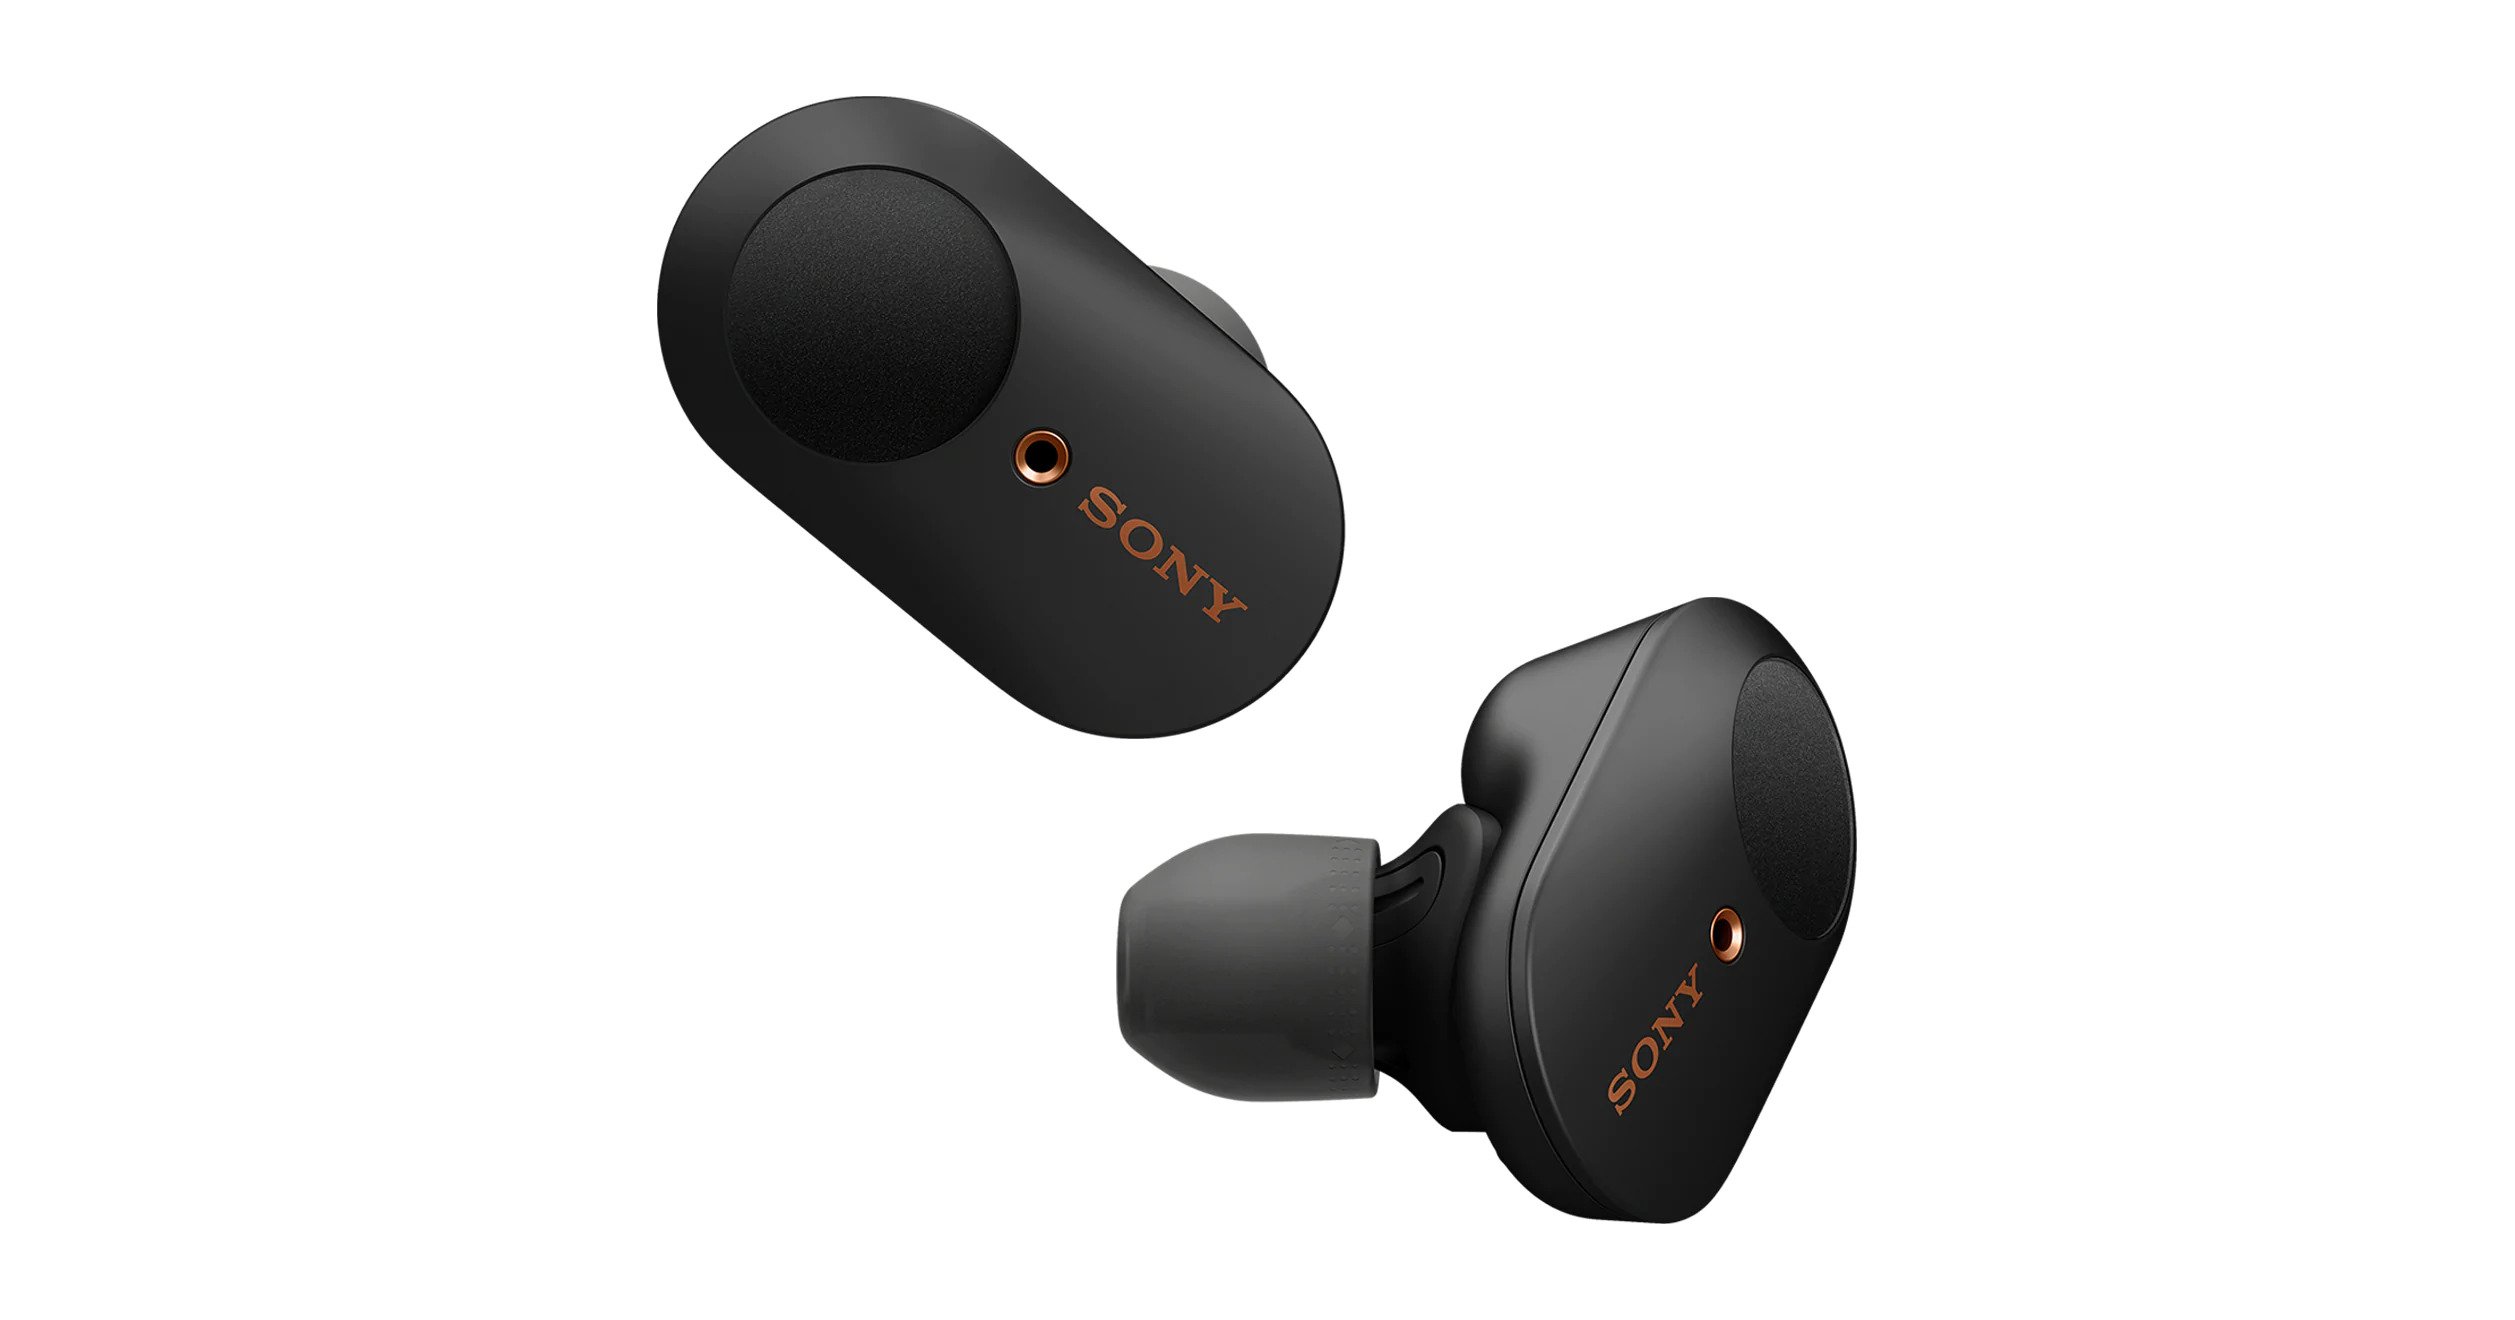 Sony WF-1000XM3 truly wireless earphones with active noise cancellation announced